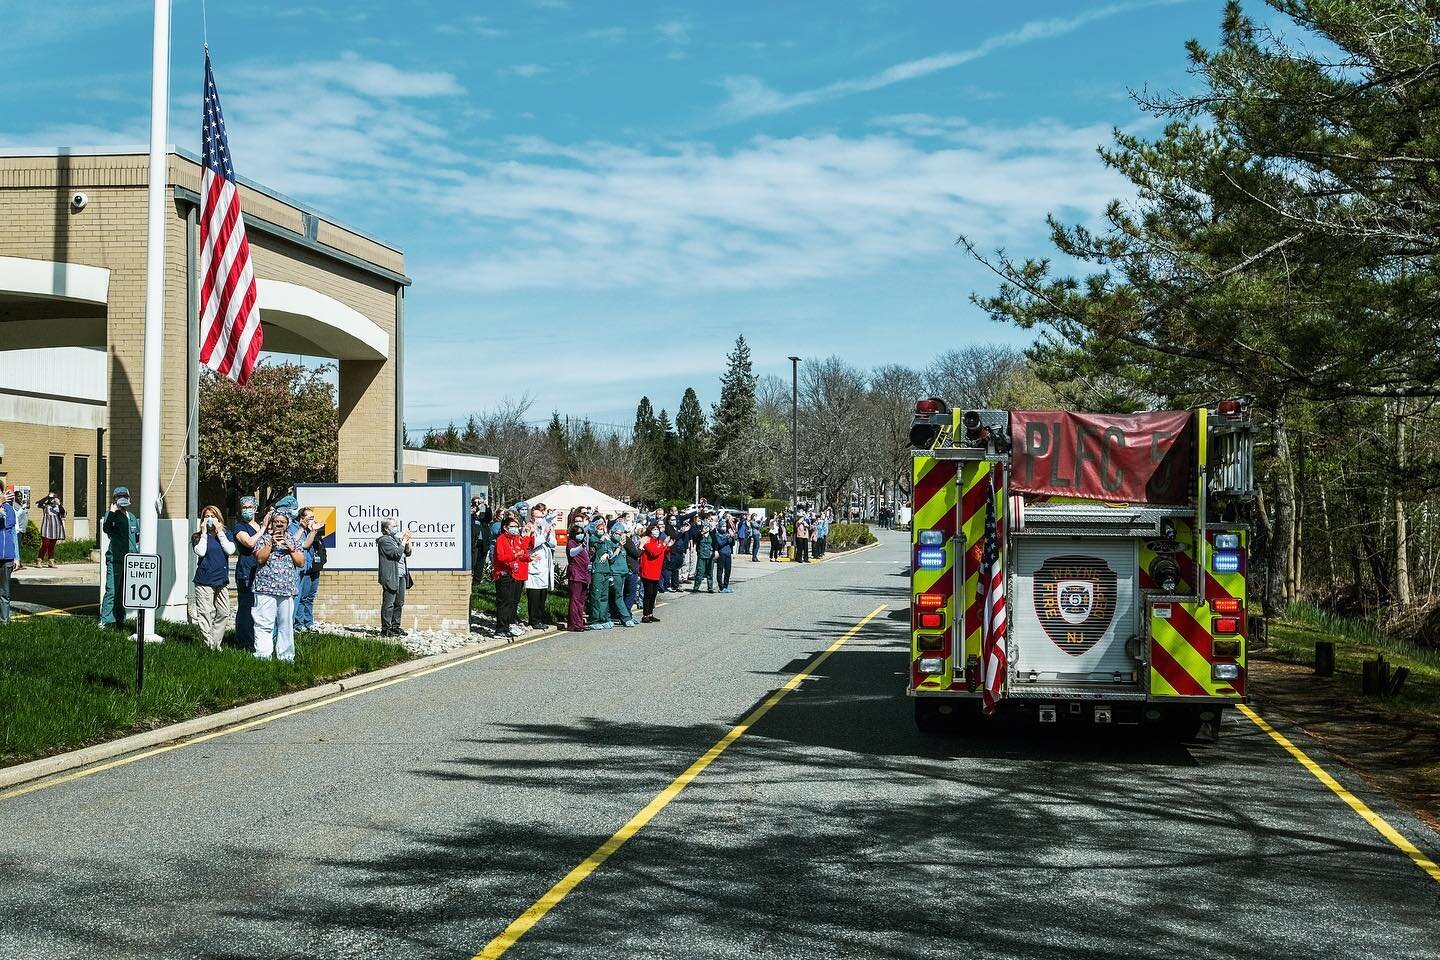 Yesterday, local police &amp; firefighters paraded by Chilton hospital &amp; St. Joseph&rsquo;s Wayne at shift change to applaud our front line healthcare workers.